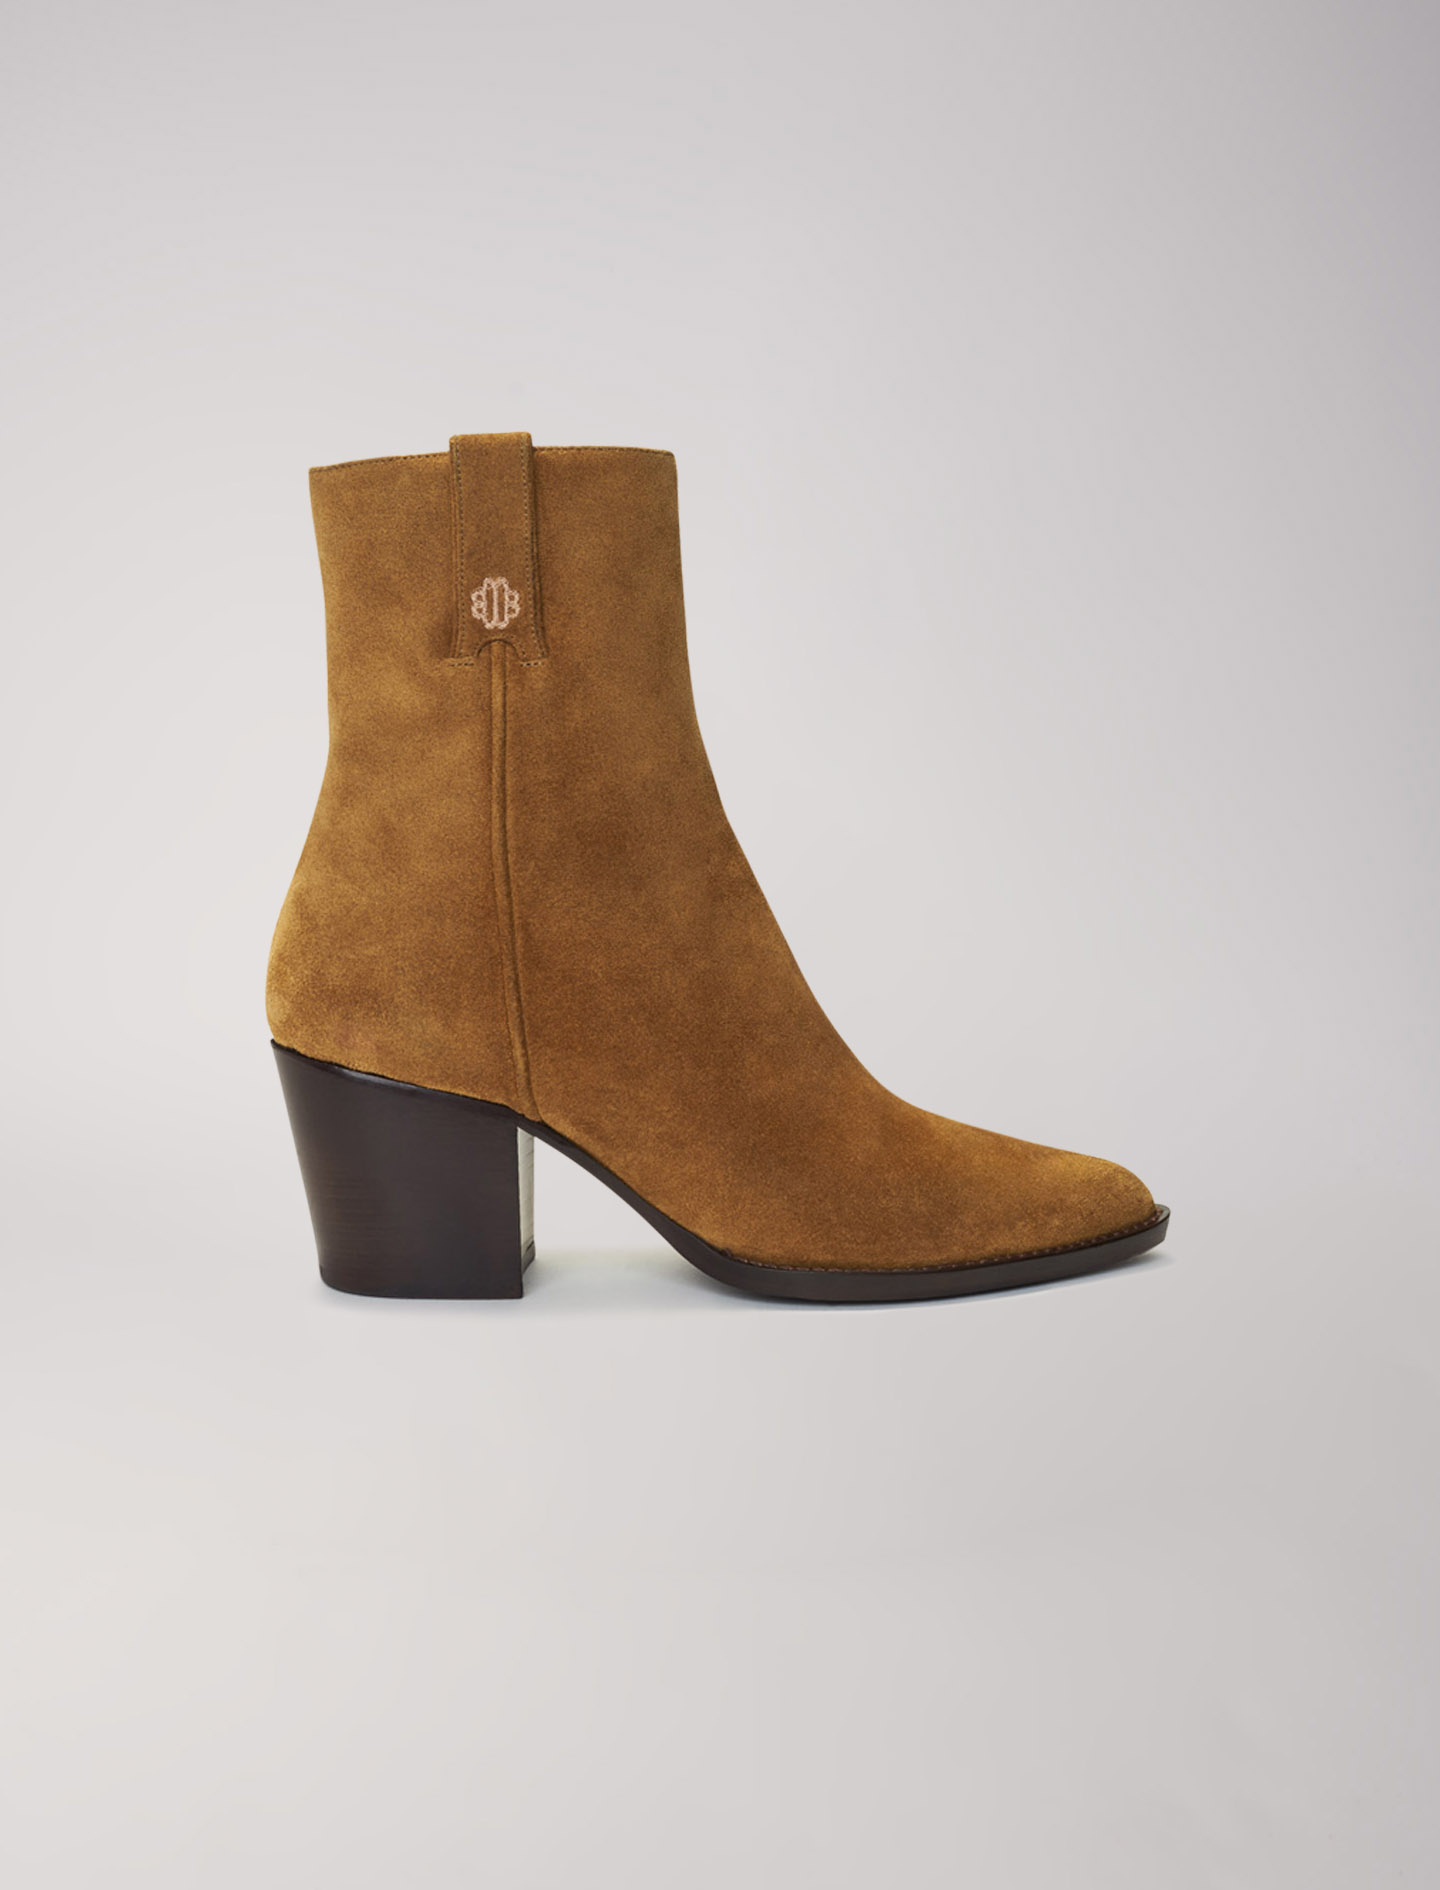 Maje Woman's cow Upper: 122FORWEST for Spring/Summer, in color Camel / Brown